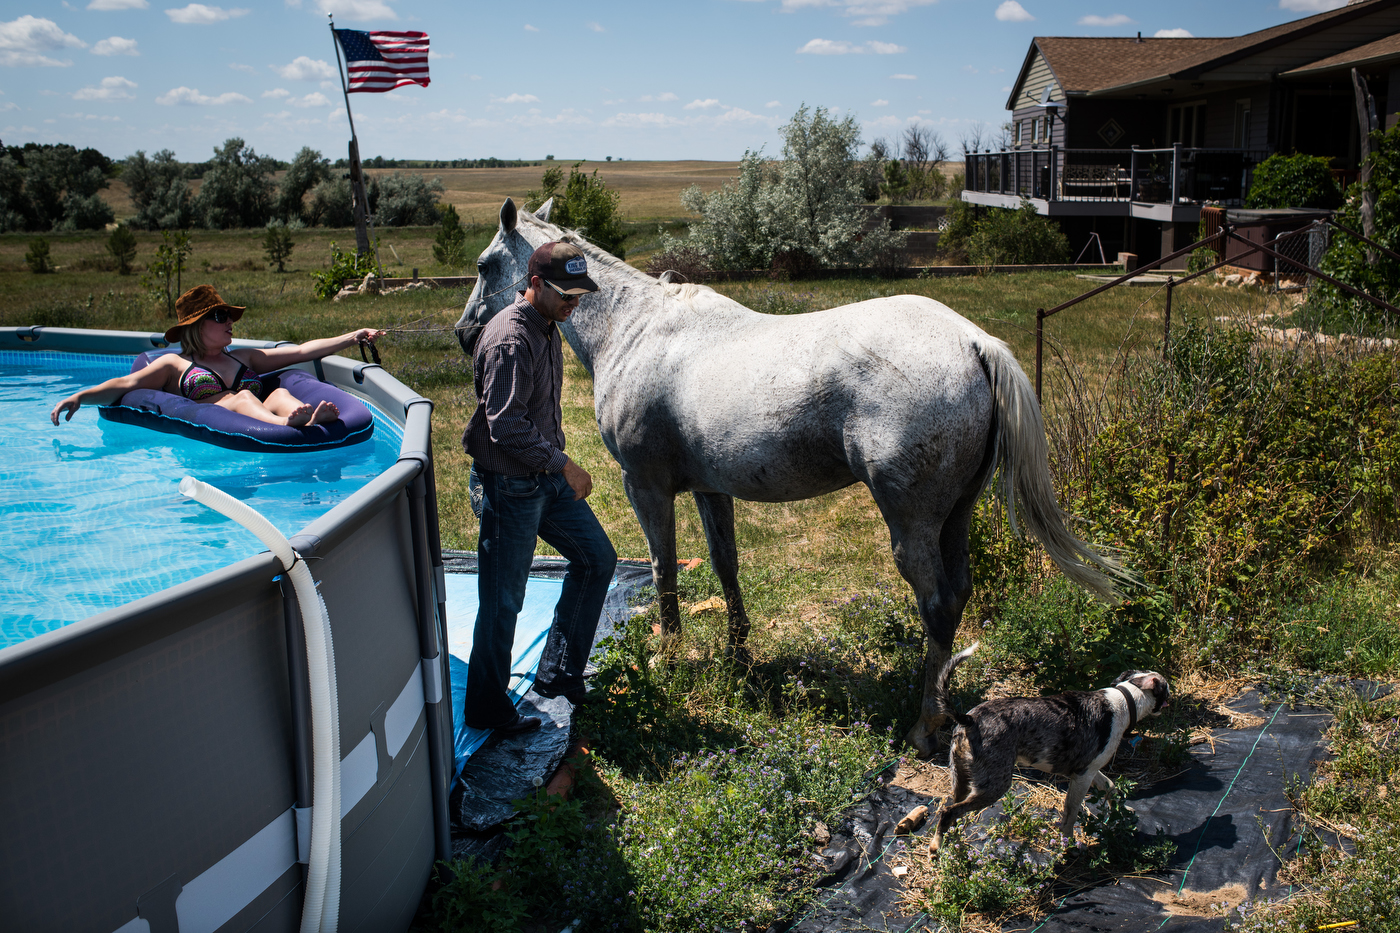  45º30'35.5"N 102º13'48.2"W. 124 miles from the nearest McDonald's. Jessica Lawson holds the war bridle on Fred the horse as her boyfriend Shane Yalowizer goes to get ready for a swim on his ranch in Meadow, SD in July, 2017. 